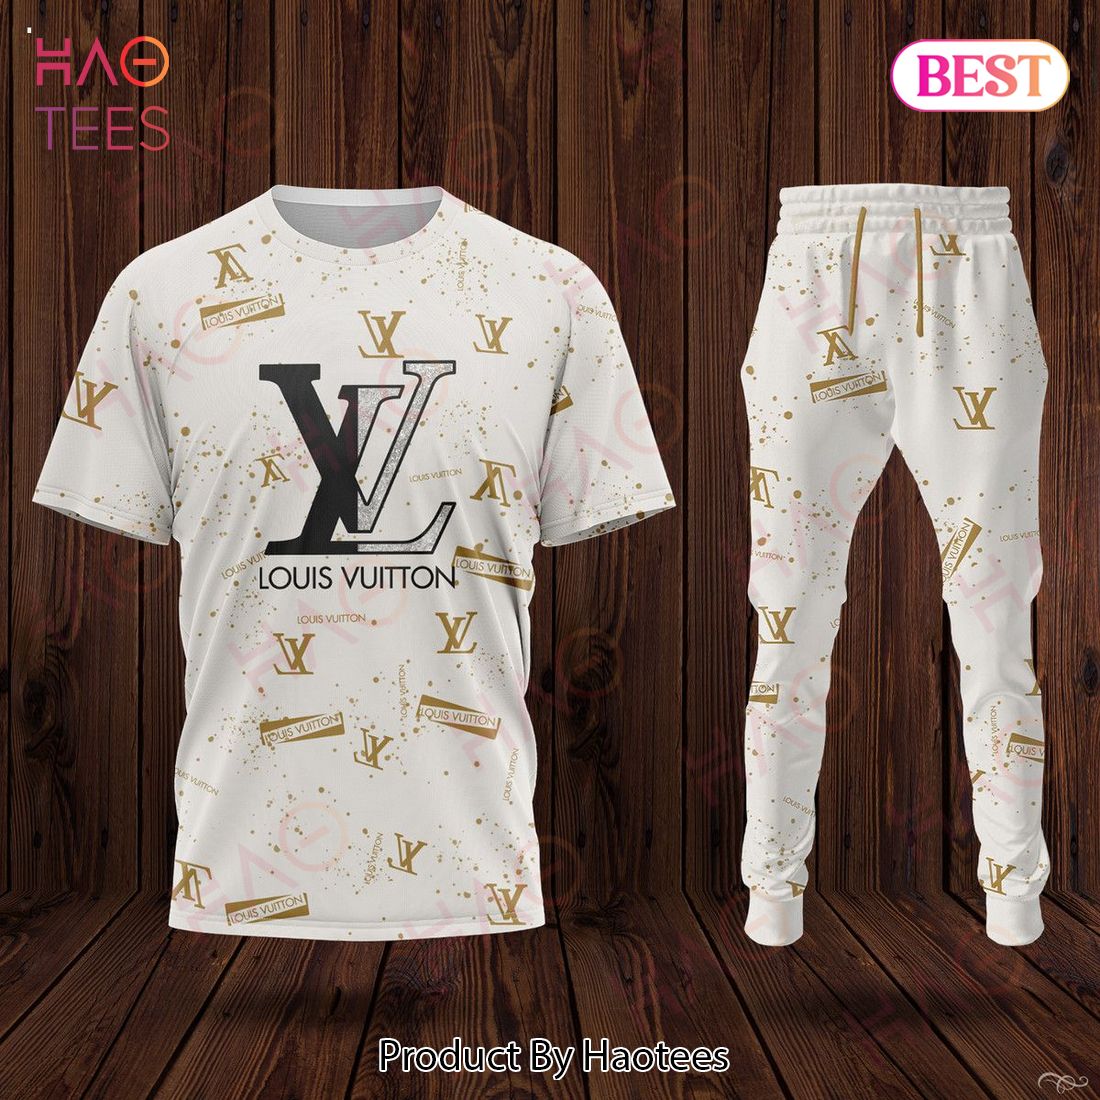 Louis Vuitton White Mix Printing Color Luxury Brand T-Shirt And Pants Limited Edition